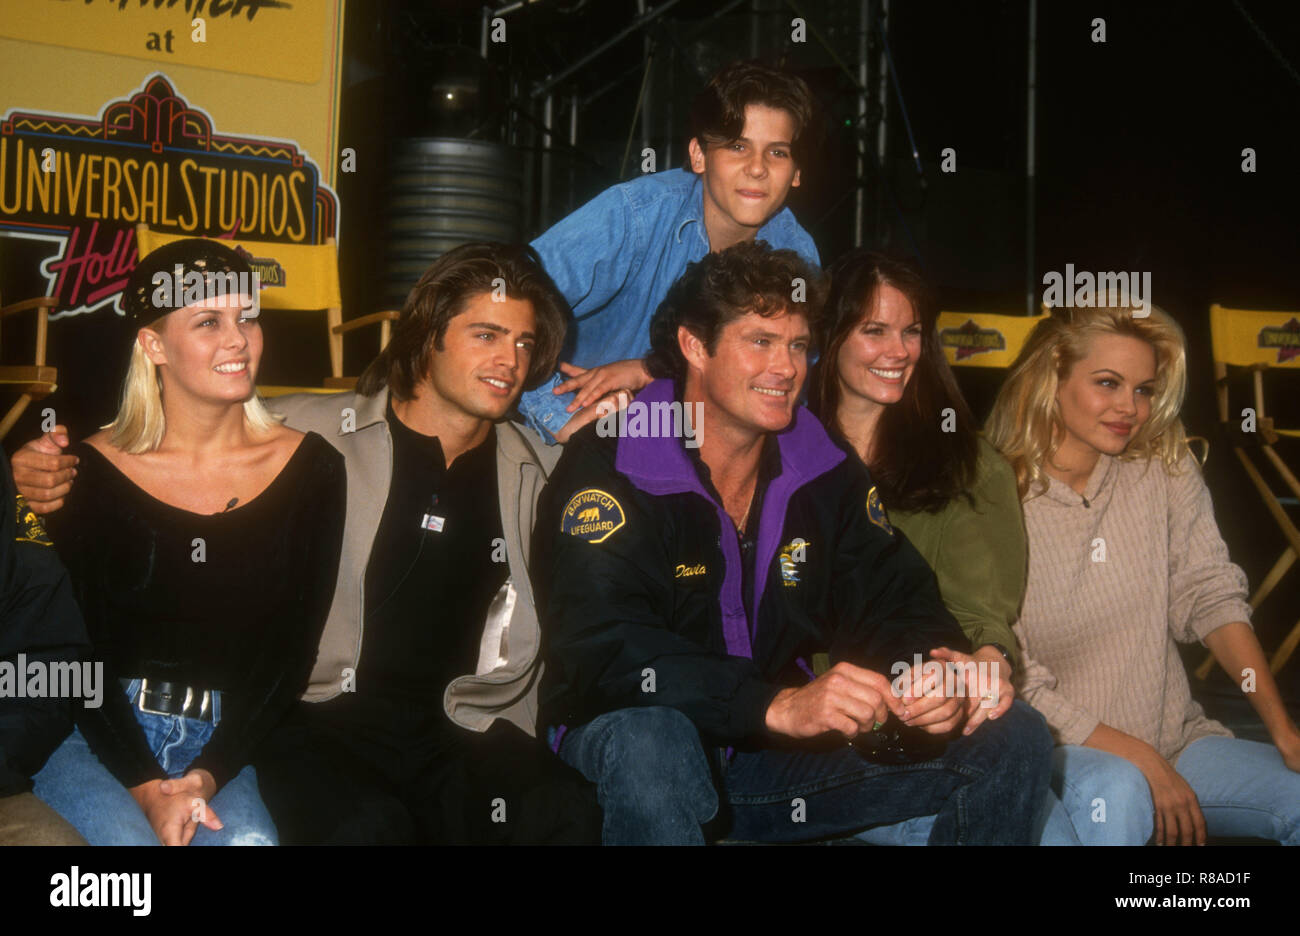 UNIVERSAL CITY, CA - APRIL 17: (L-R) Actress Nicole Eggert, actor David Charvet, actor Jeremy Jackson, actor David Hasselhoff, actress Alexandra Paul and actress Pamela Anderson attend 'Baywatch' Exclusive Behind-the-Scenes Tour on April 17, 1993 at Universal Studios Hollywood in Universal City, California. Photo by Barry King/Alamy Stock Photo Stock Photo